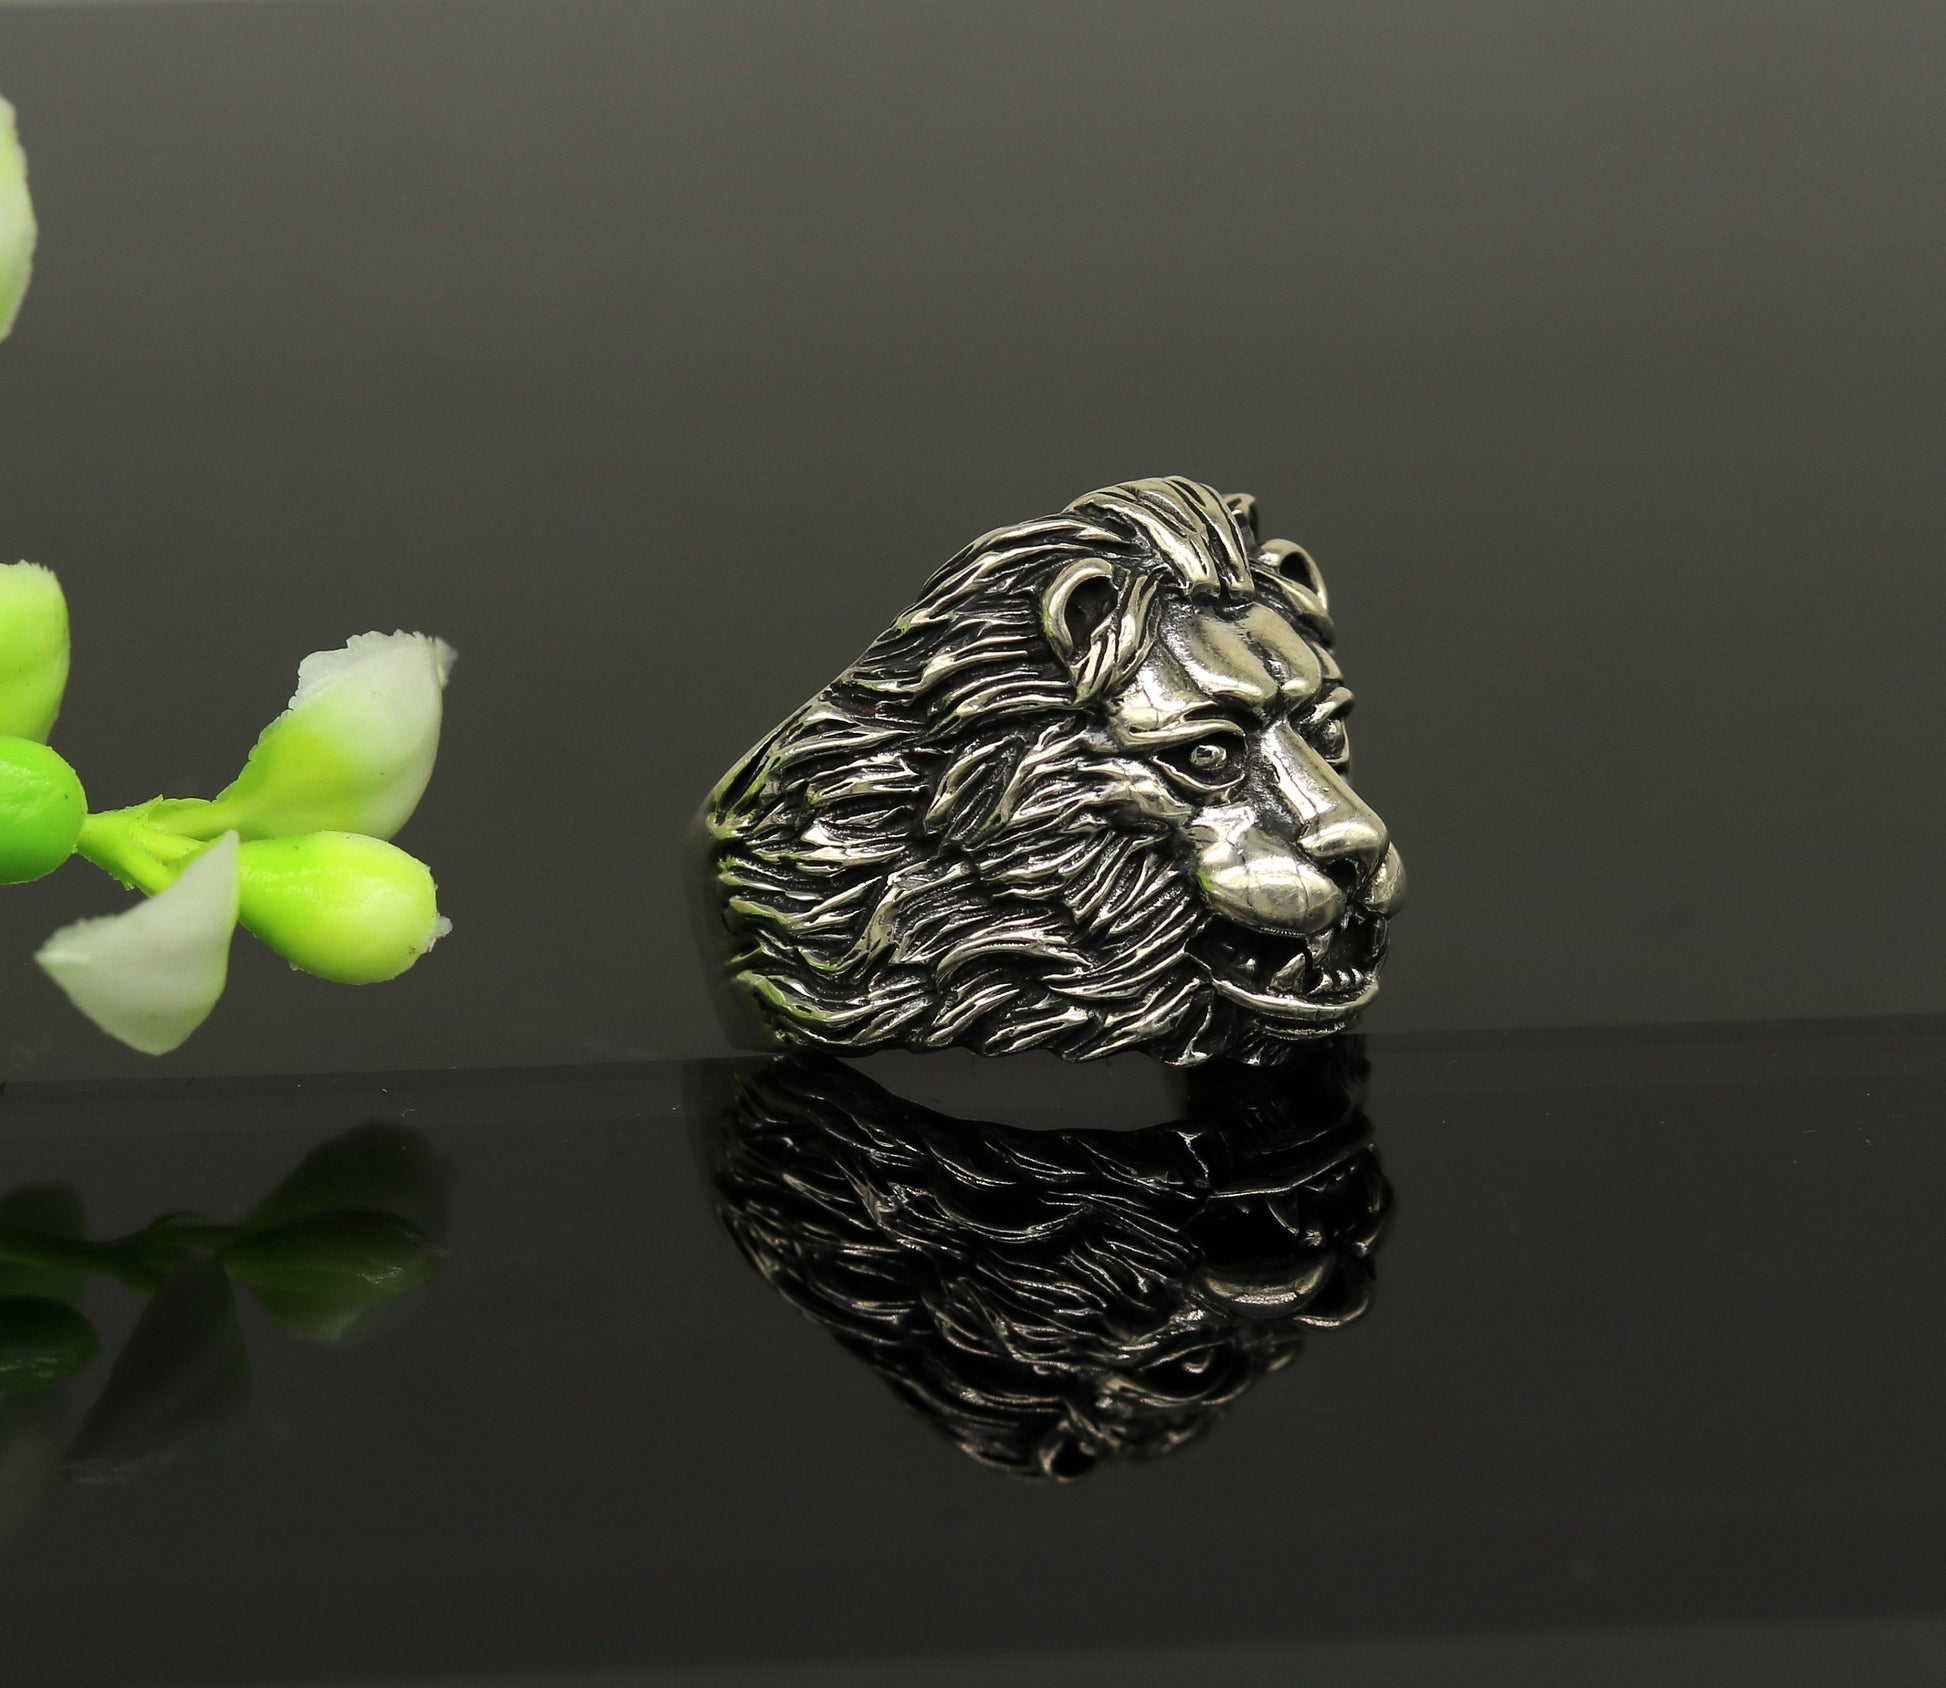 925 sterling silver handmade excellent lion face vintage stylish ring band unisex customized jewelry from Rajasthan india sr0275 - TRIBAL ORNAMENTS